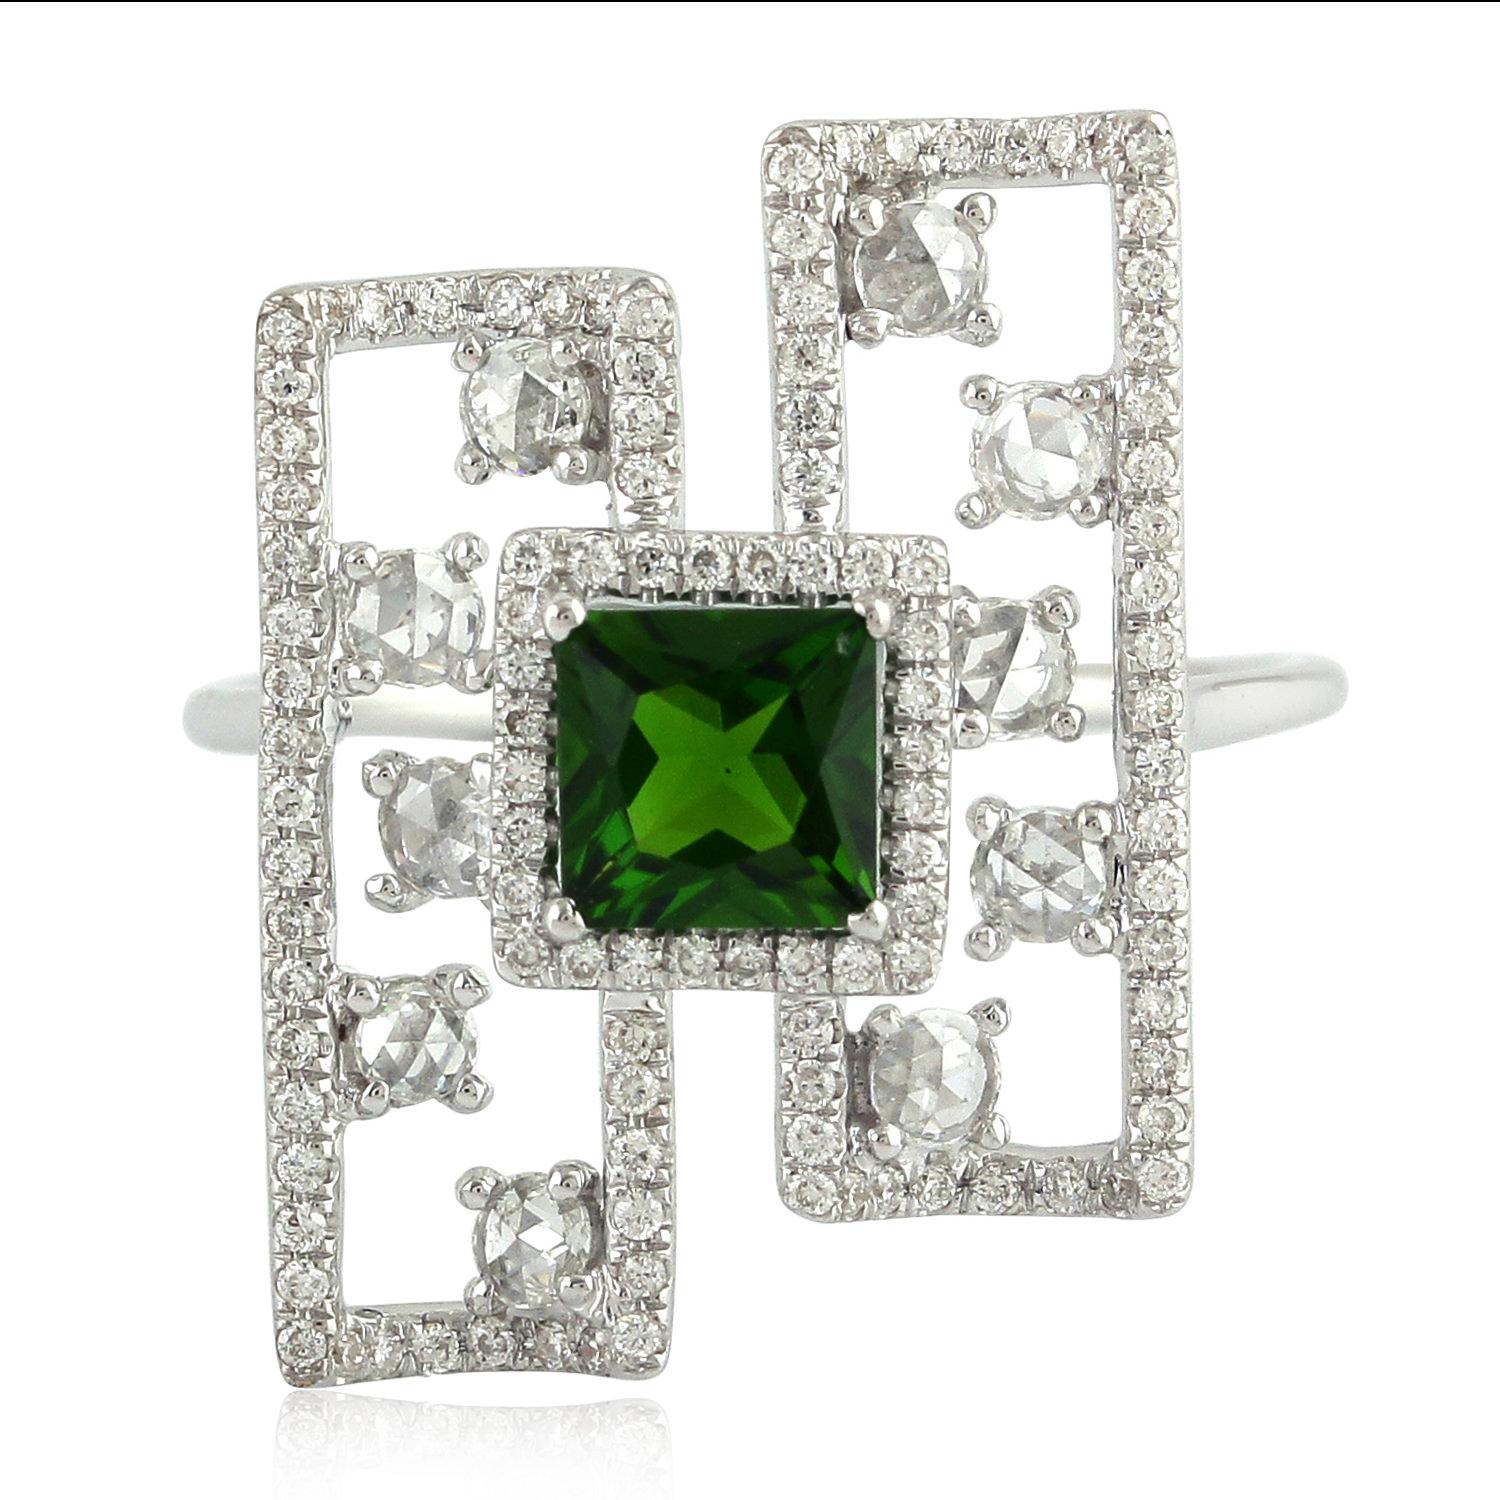 Chrome Diopside Cocktail Ring With Diamonds Made In 18k White Gold In New Condition For Sale In New York, NY